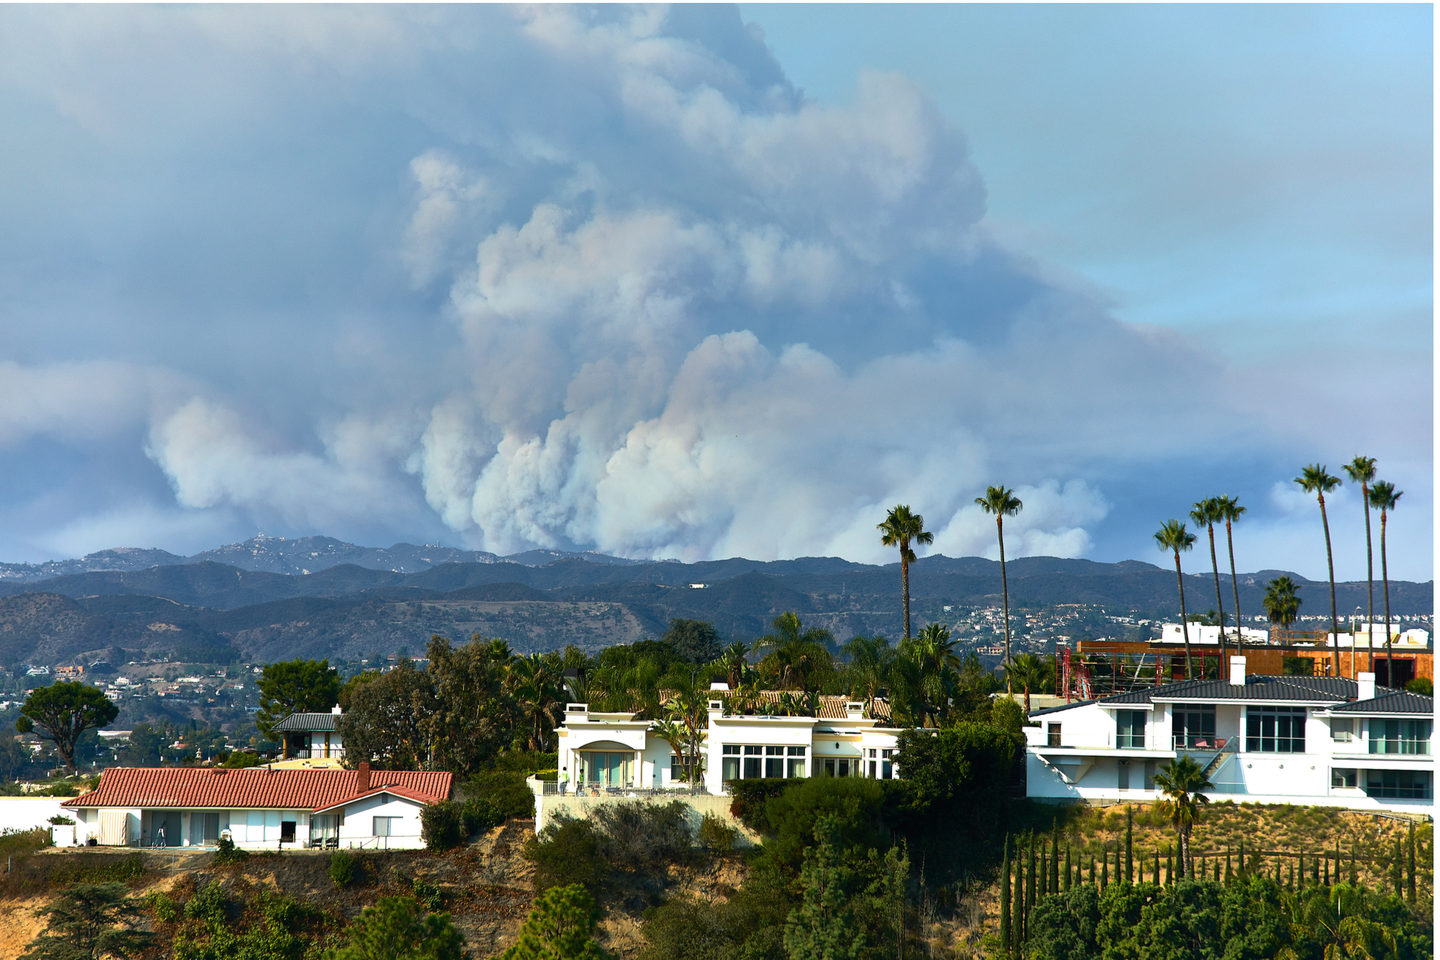 Photo of houses with fire smoke in the background of hills